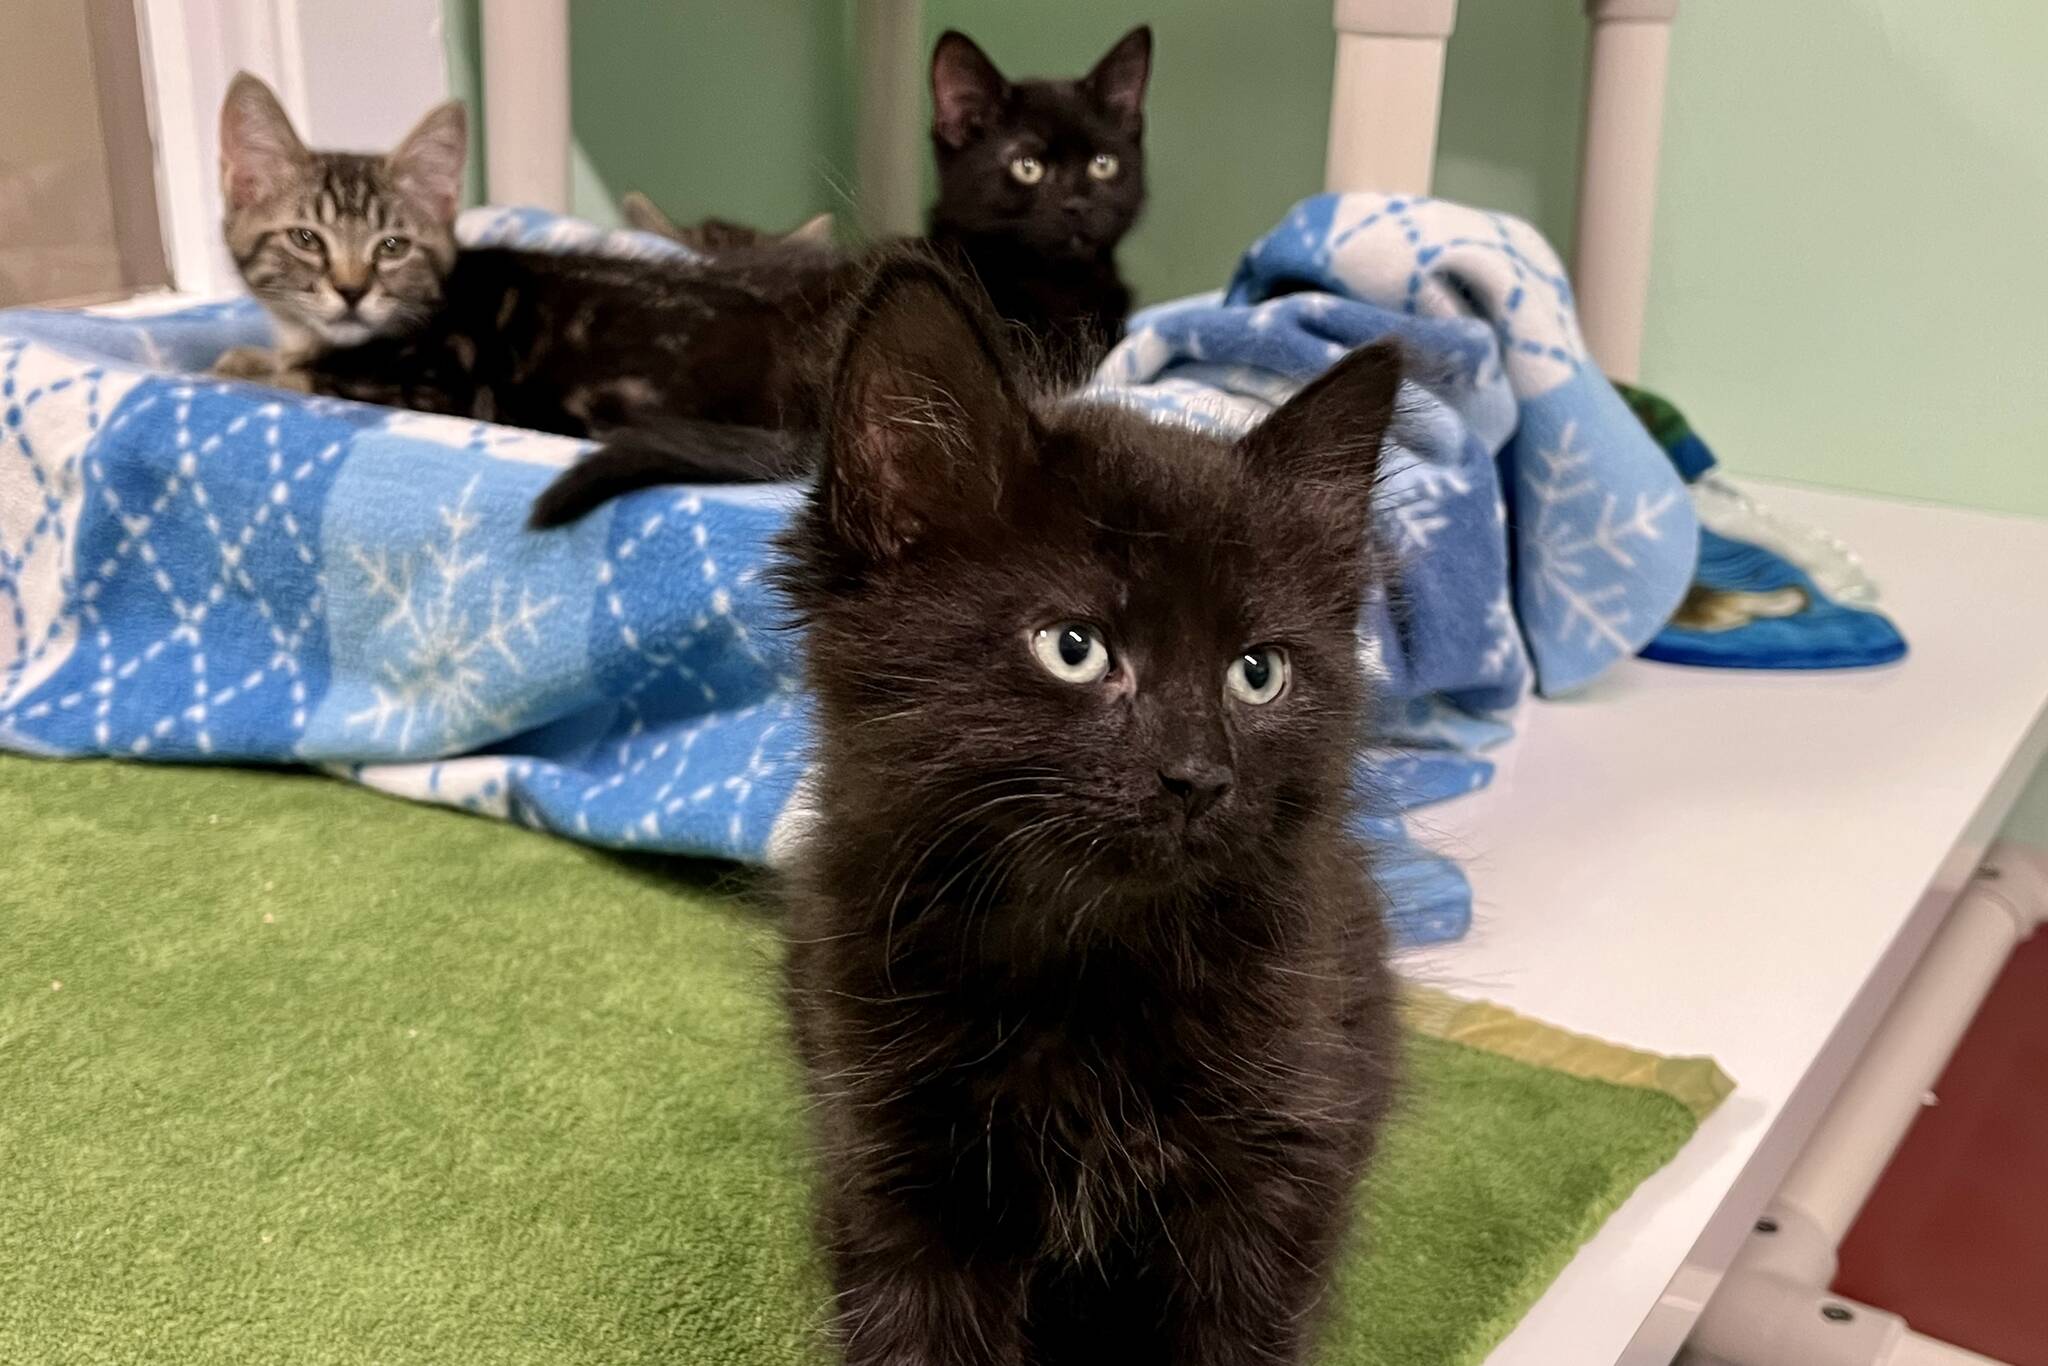 Some of the many kittens currently available for adoption at the Juneau Animal Rescue. (Jonson Kuhn / Juneau Empire)